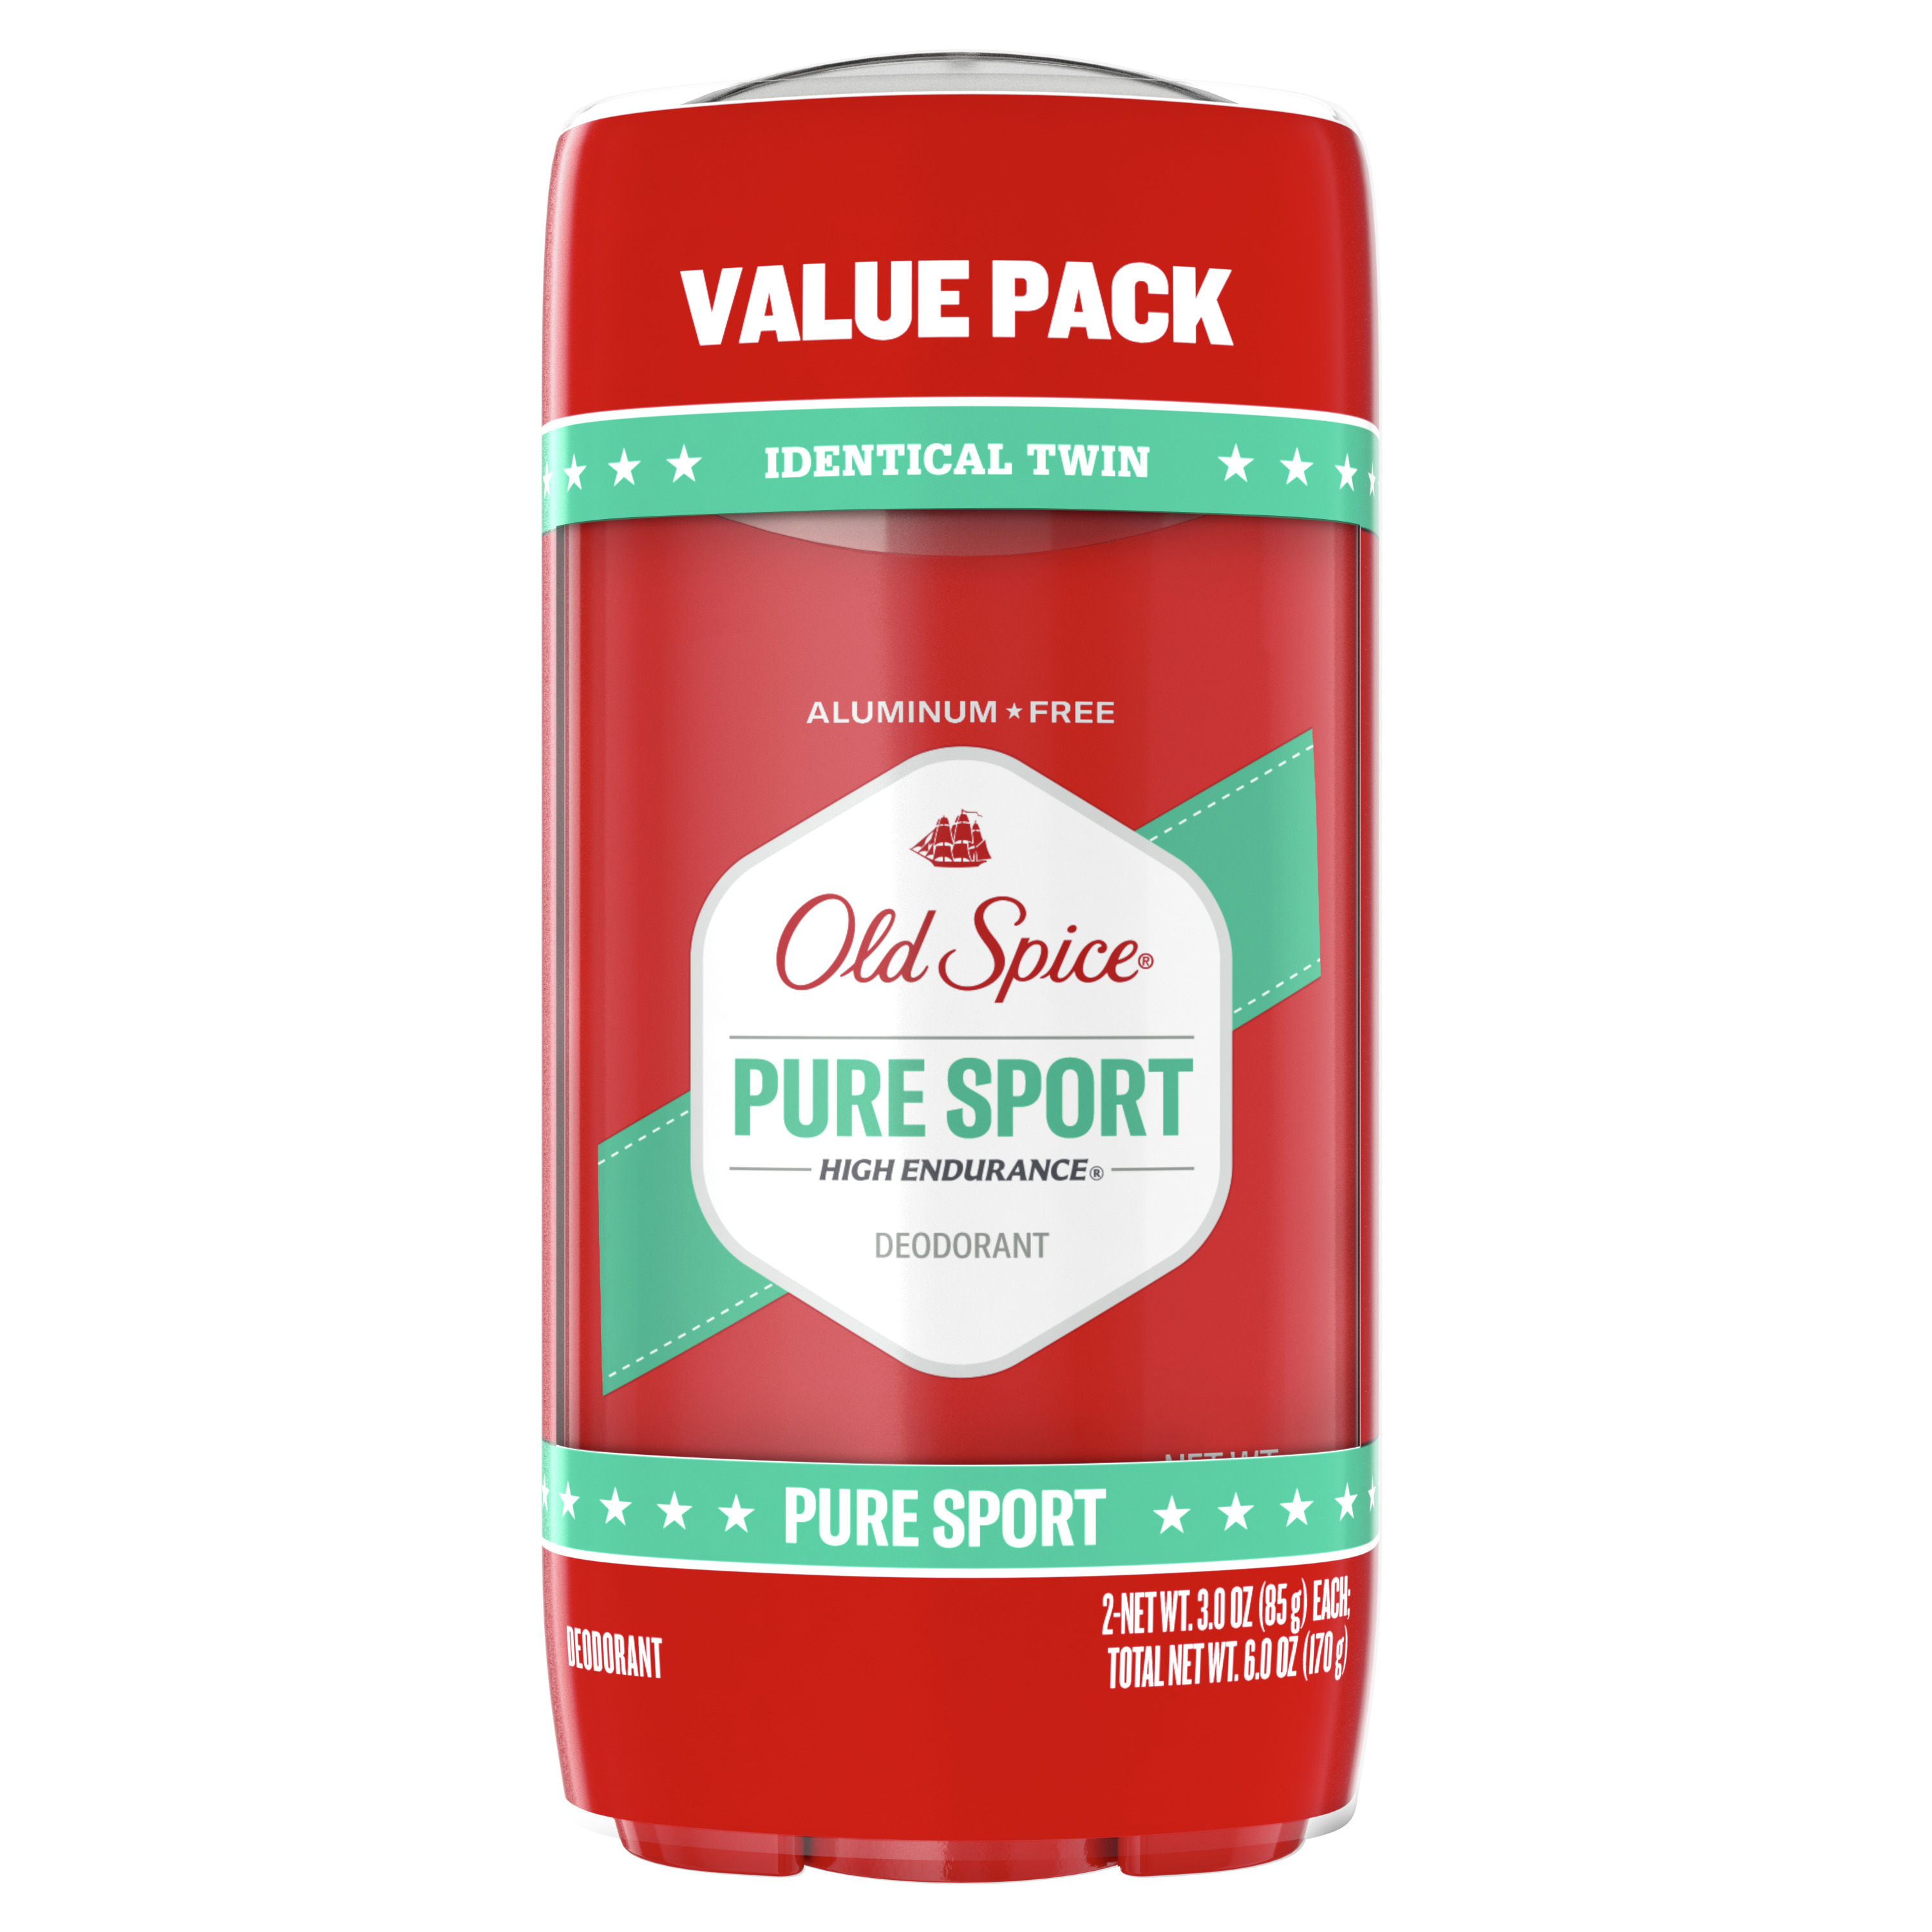 Old Spice High Endurance Male Deodorant Stick Pure Sport Scent - 6 oz - image 1 of 6